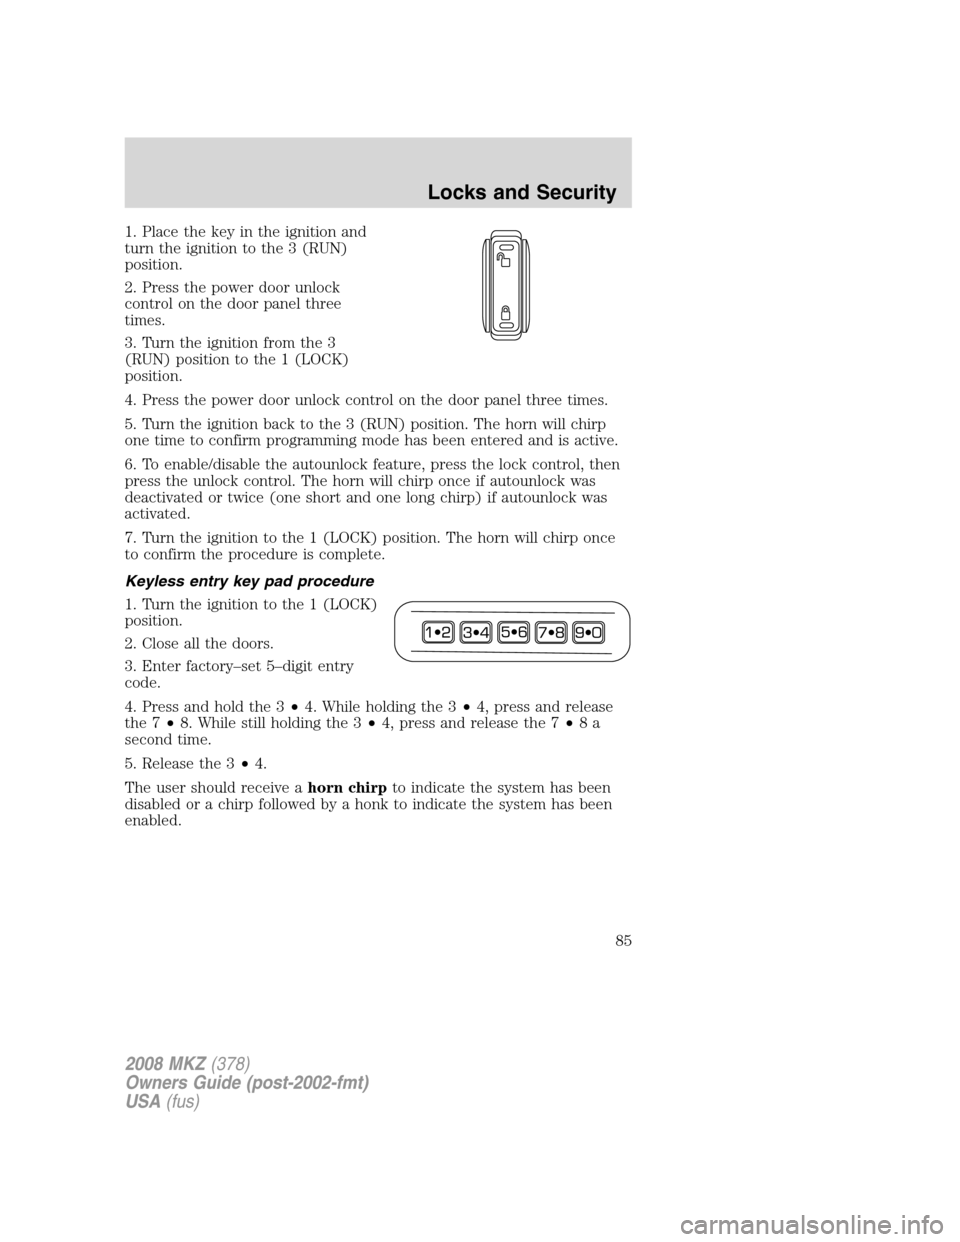 LINCOLN MKZ 2008  Owners Manual 1. Place the key in the ignition and
turn the ignition to the 3 (RUN)
position.
2. Press the power door unlock
control on the door panel three
times.
3. Turn the ignition from the 3
(RUN) position to 